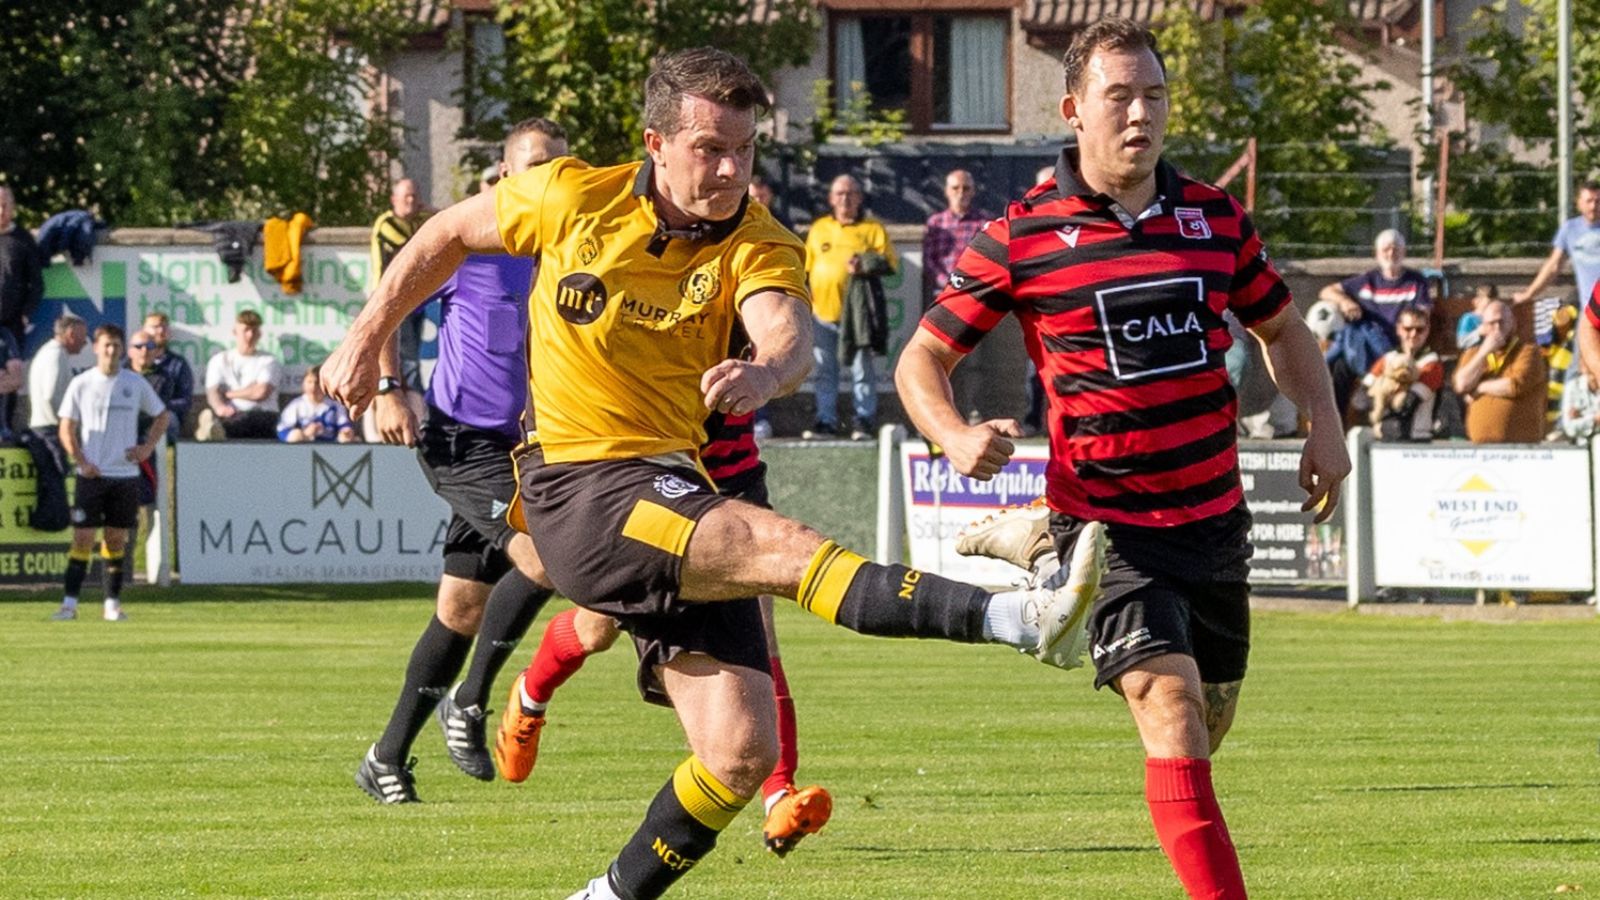 Conor Gethins in action for Nairn County v Inverurie Loco Works